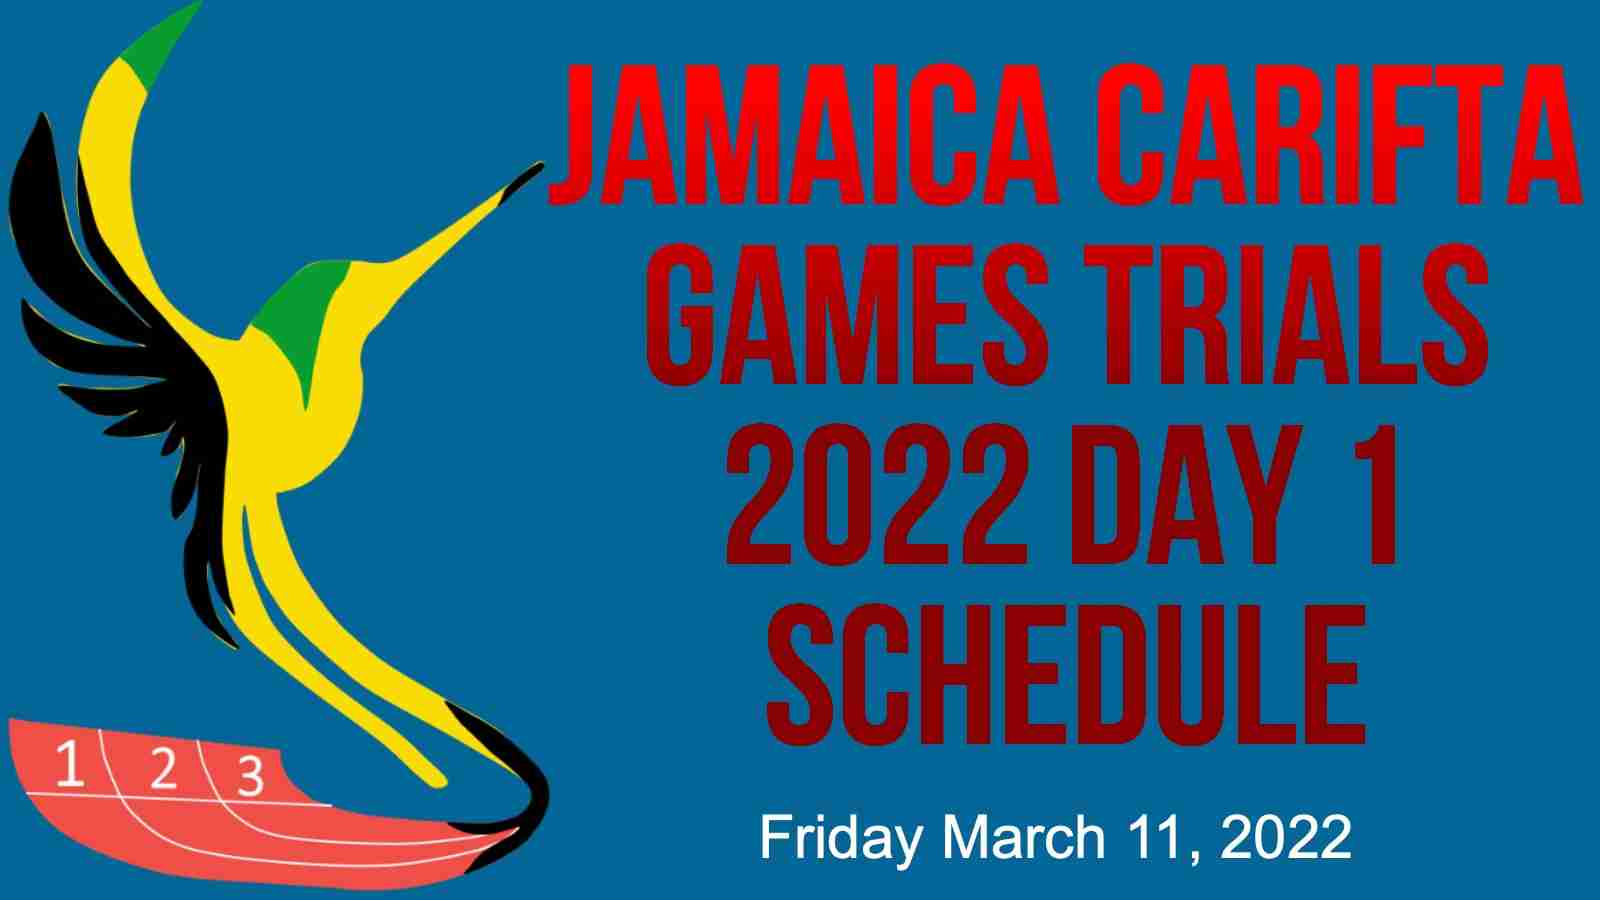 How to watch the 2022 Jamaica Carifta Games trials: Day 1 schedule